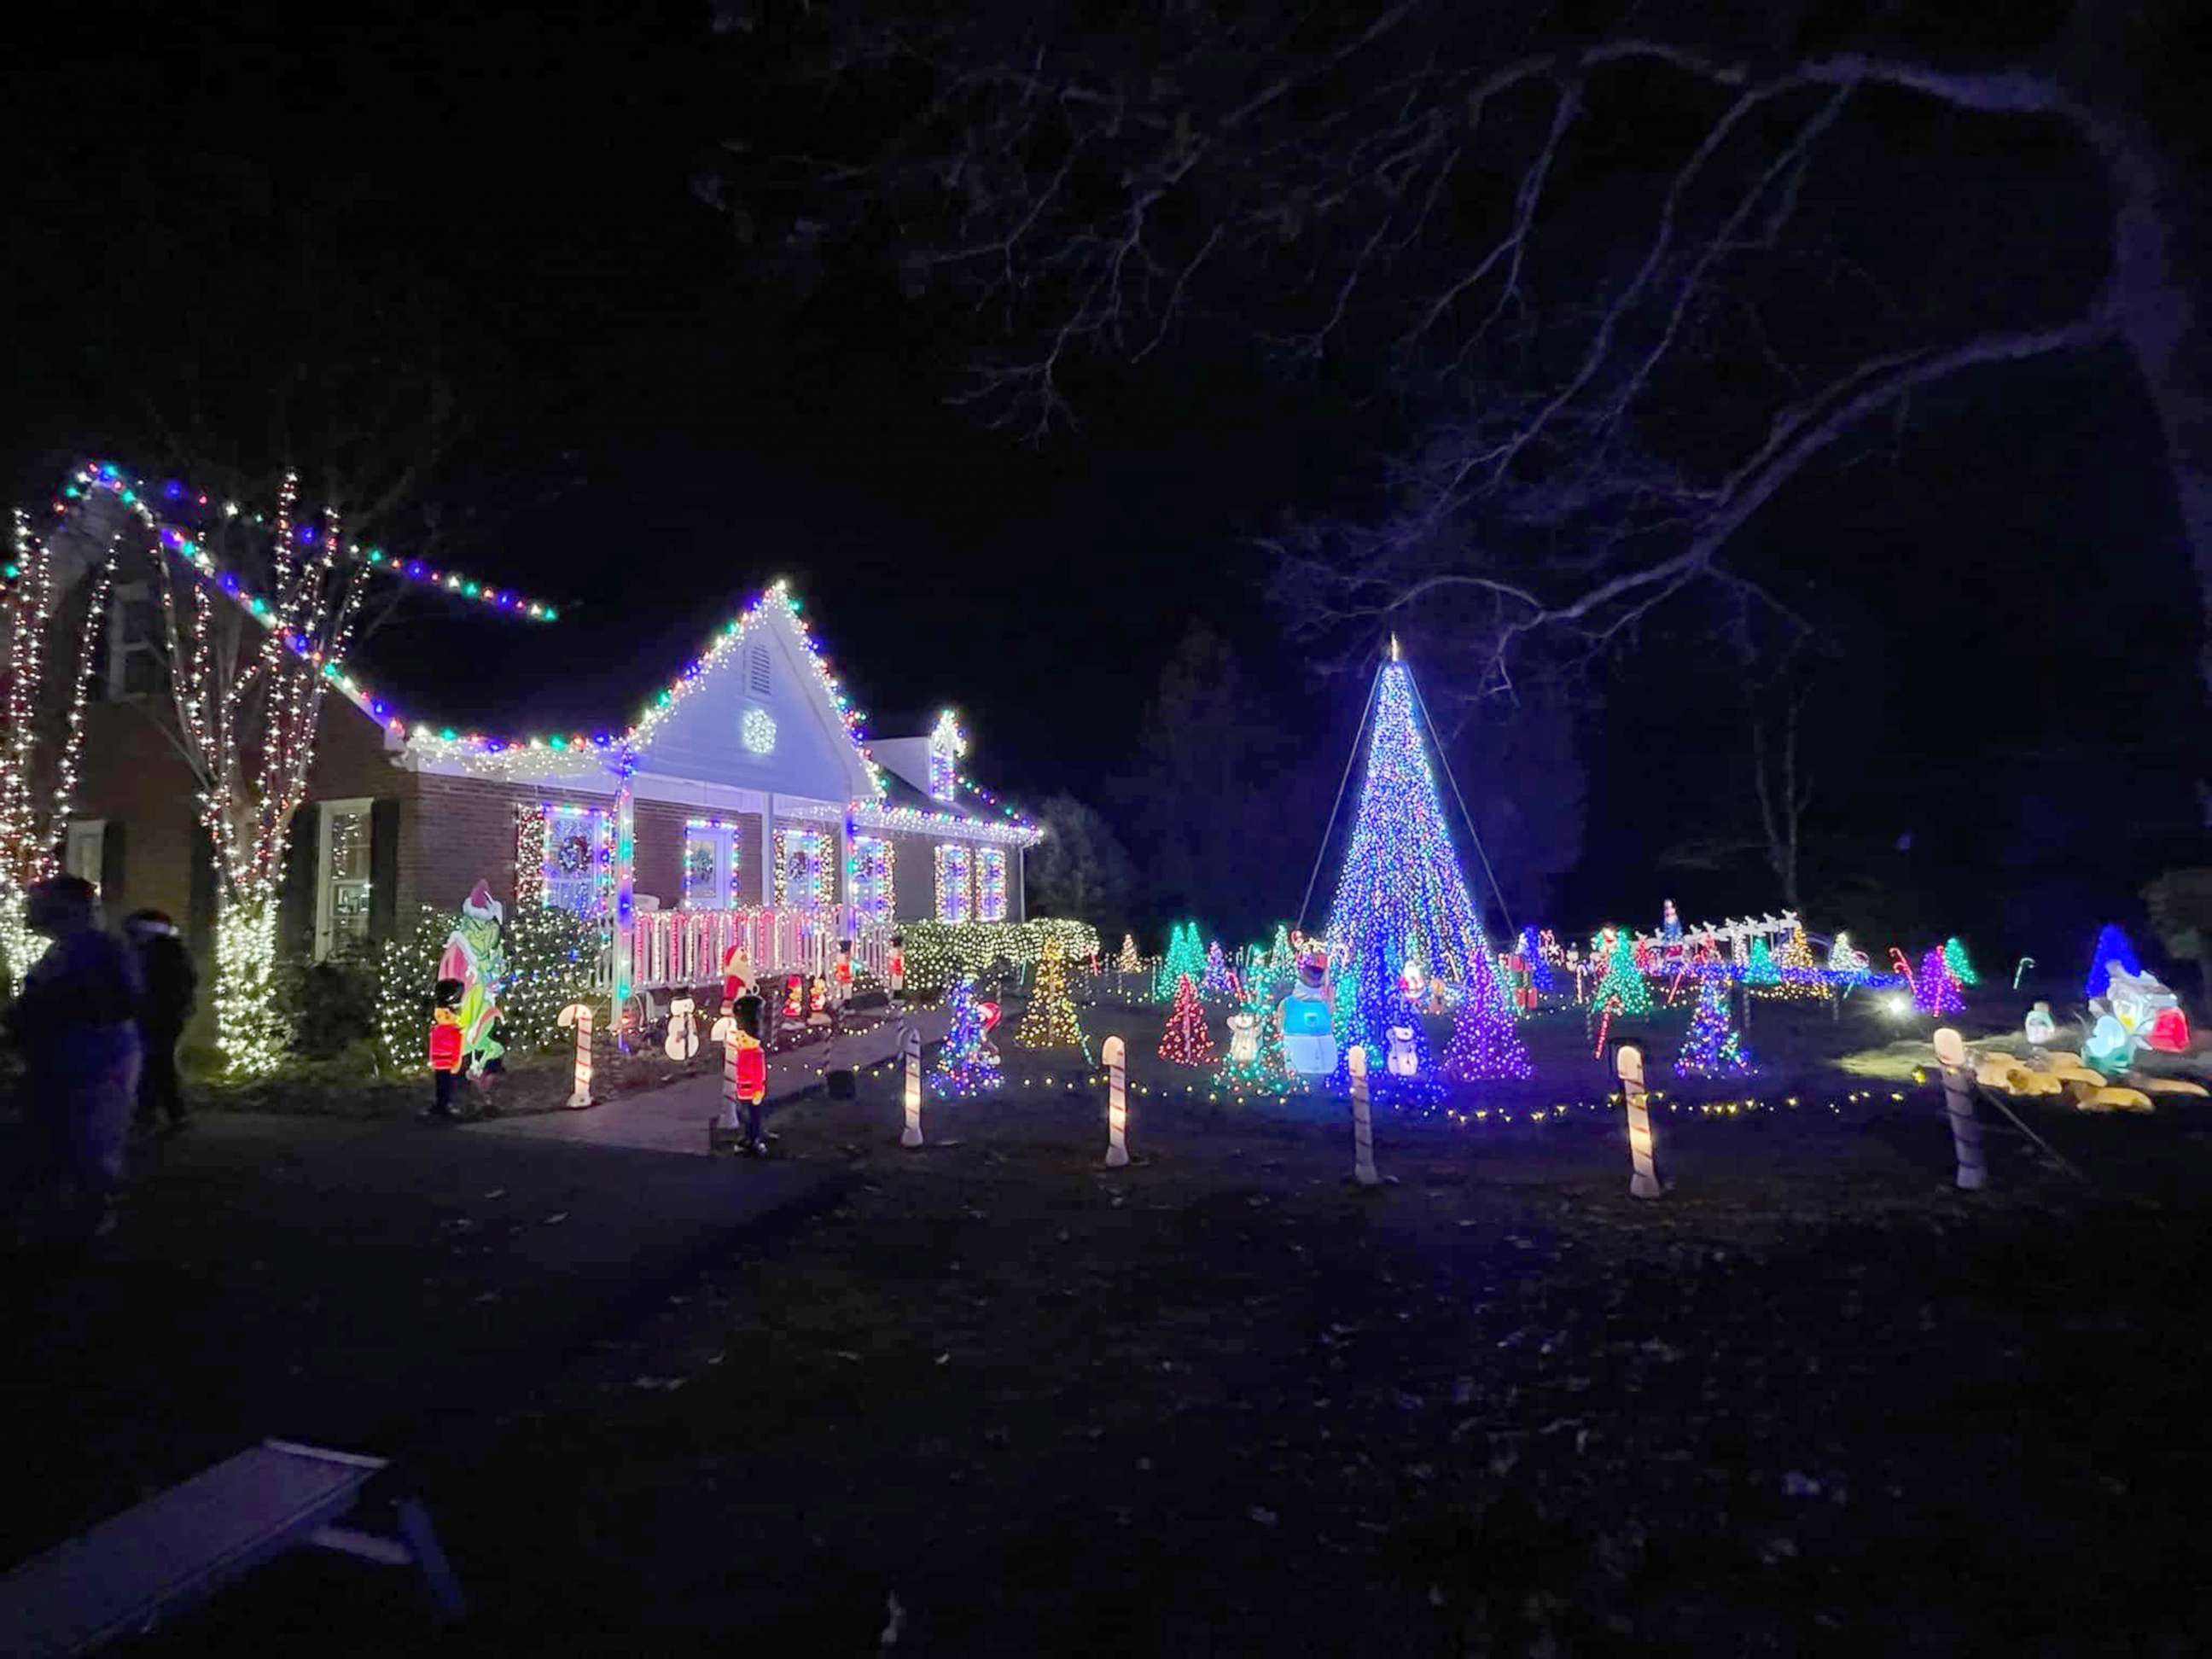 PHOTO: The Make-A-Wish Foundation's Christmas light display for Wyatt, a 6-year-old boy with Leukemia from Durham, N.C.